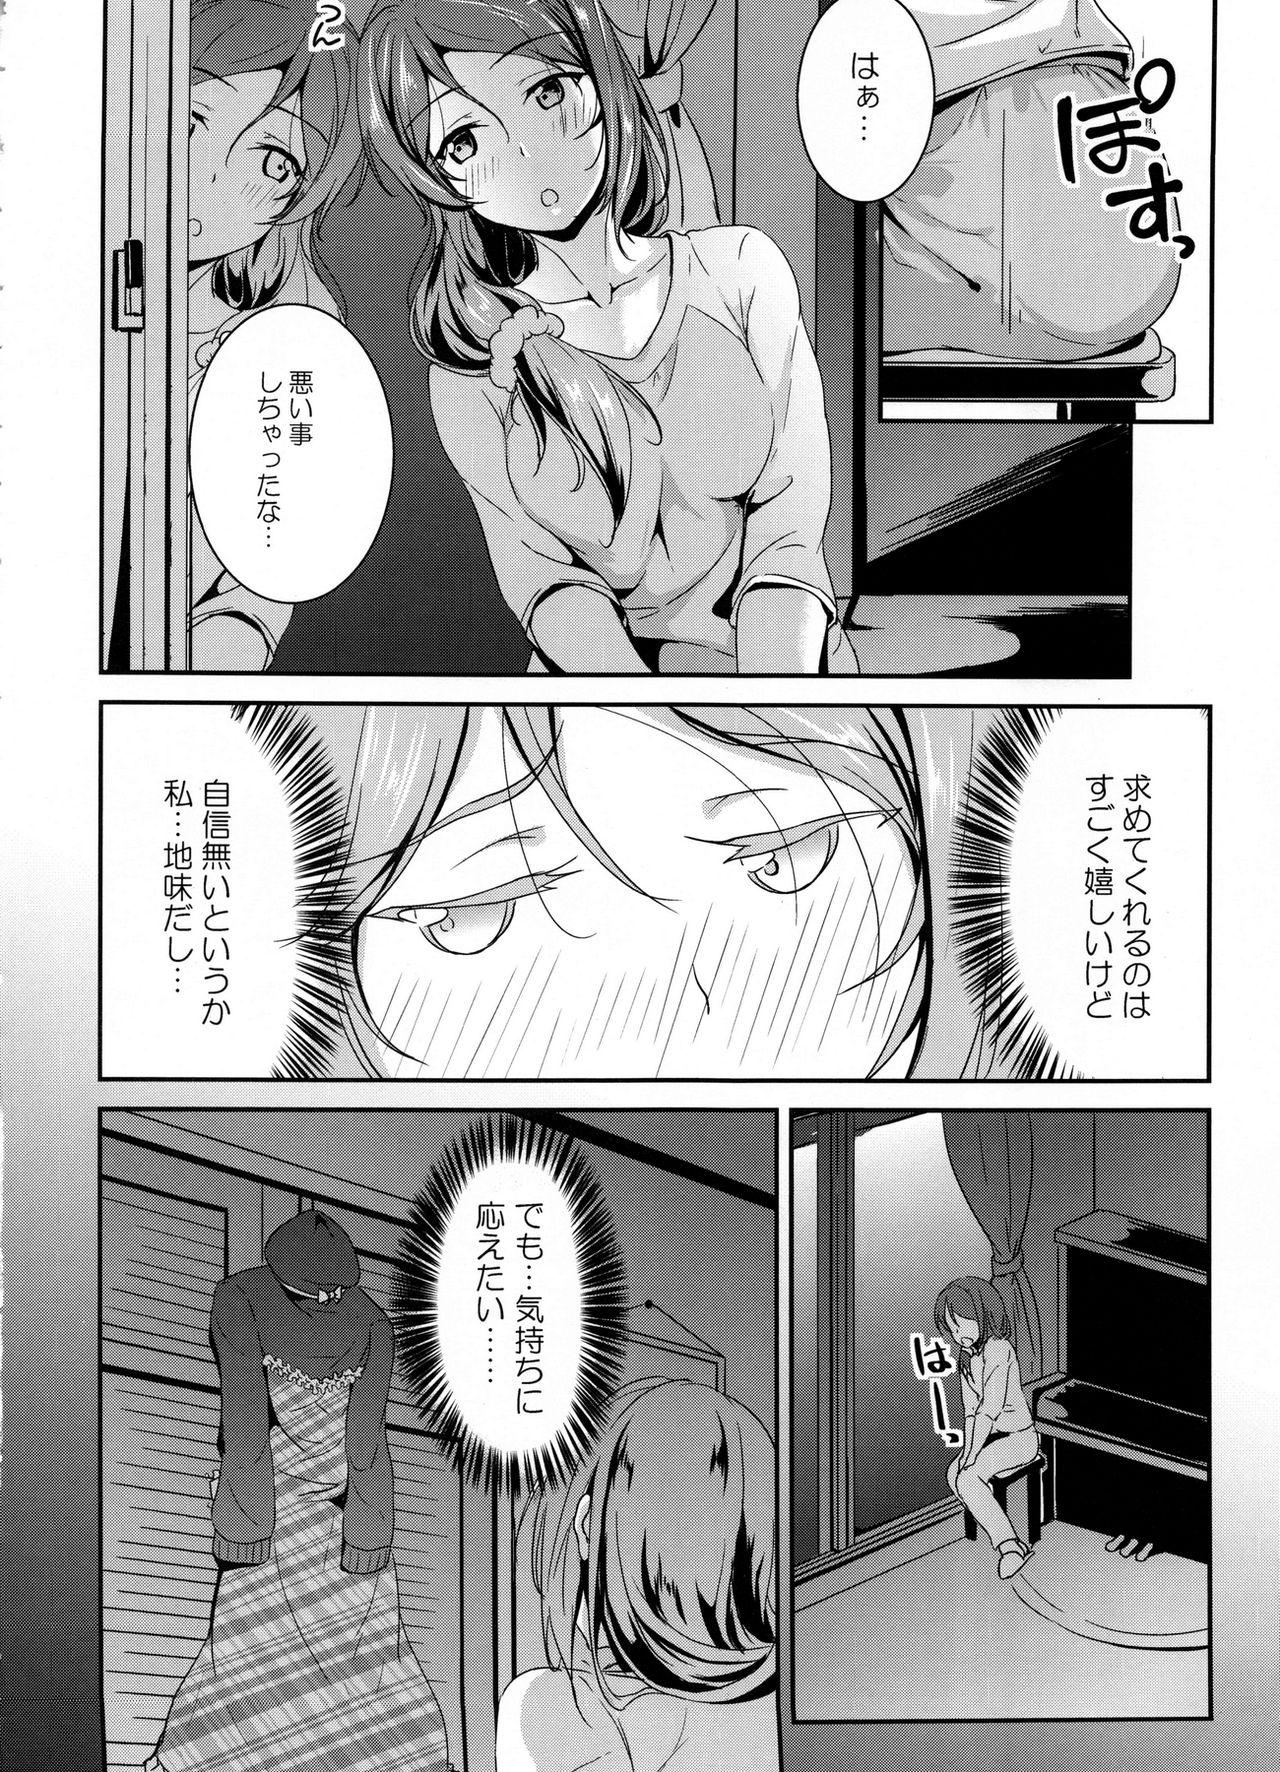 And Apricot Heart - Love live sunshine Affair - Page 5